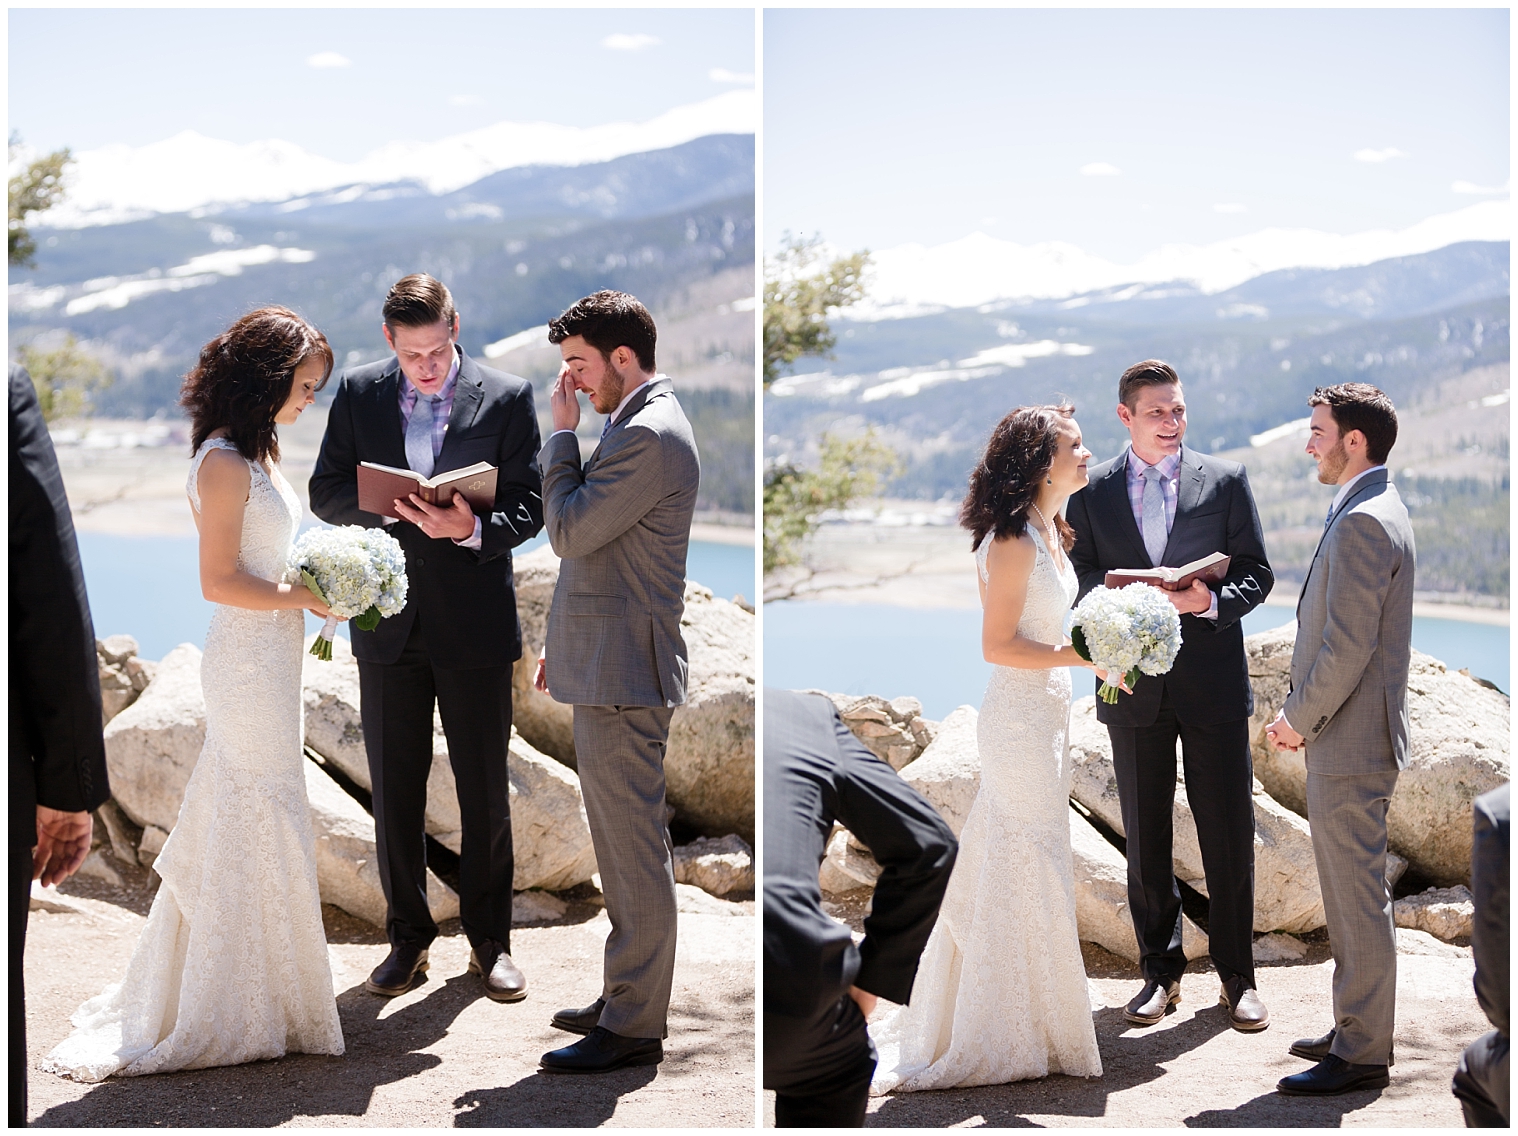 Photos of a Sapphire point intimate wedding ceremony by a Breckenridge wedding photographer.